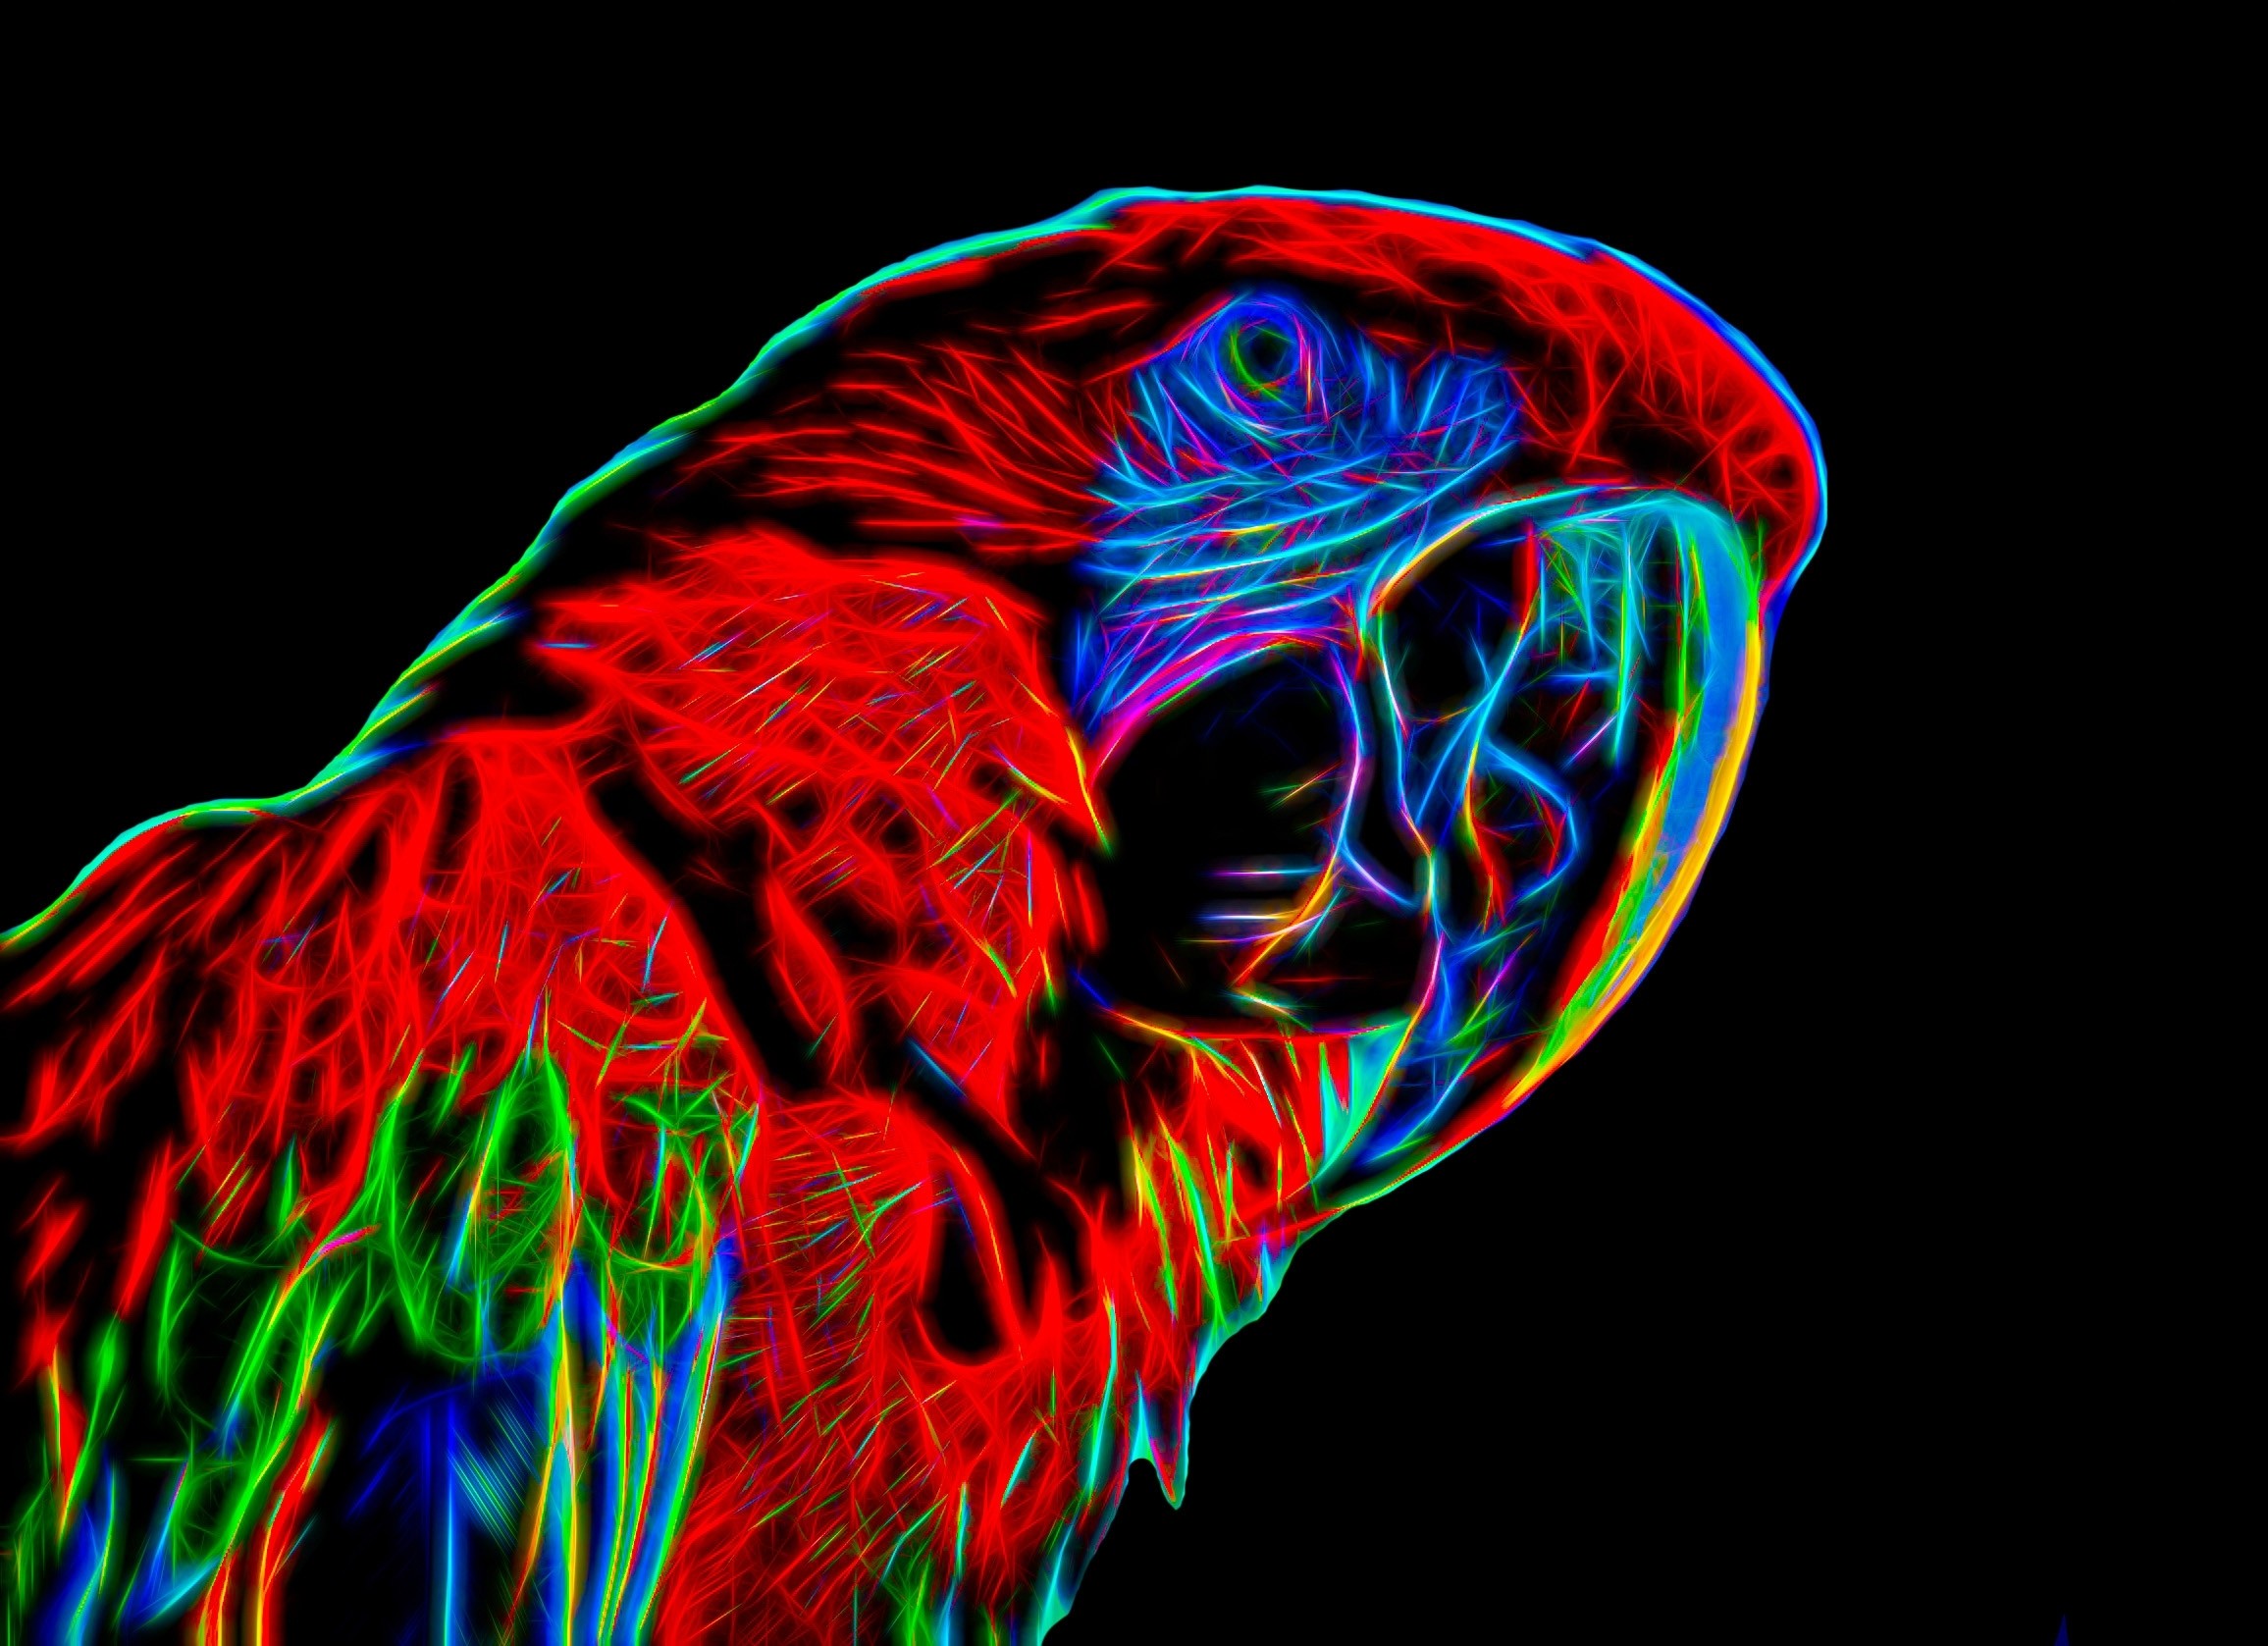 Parrot Neon Blank Greeting Card